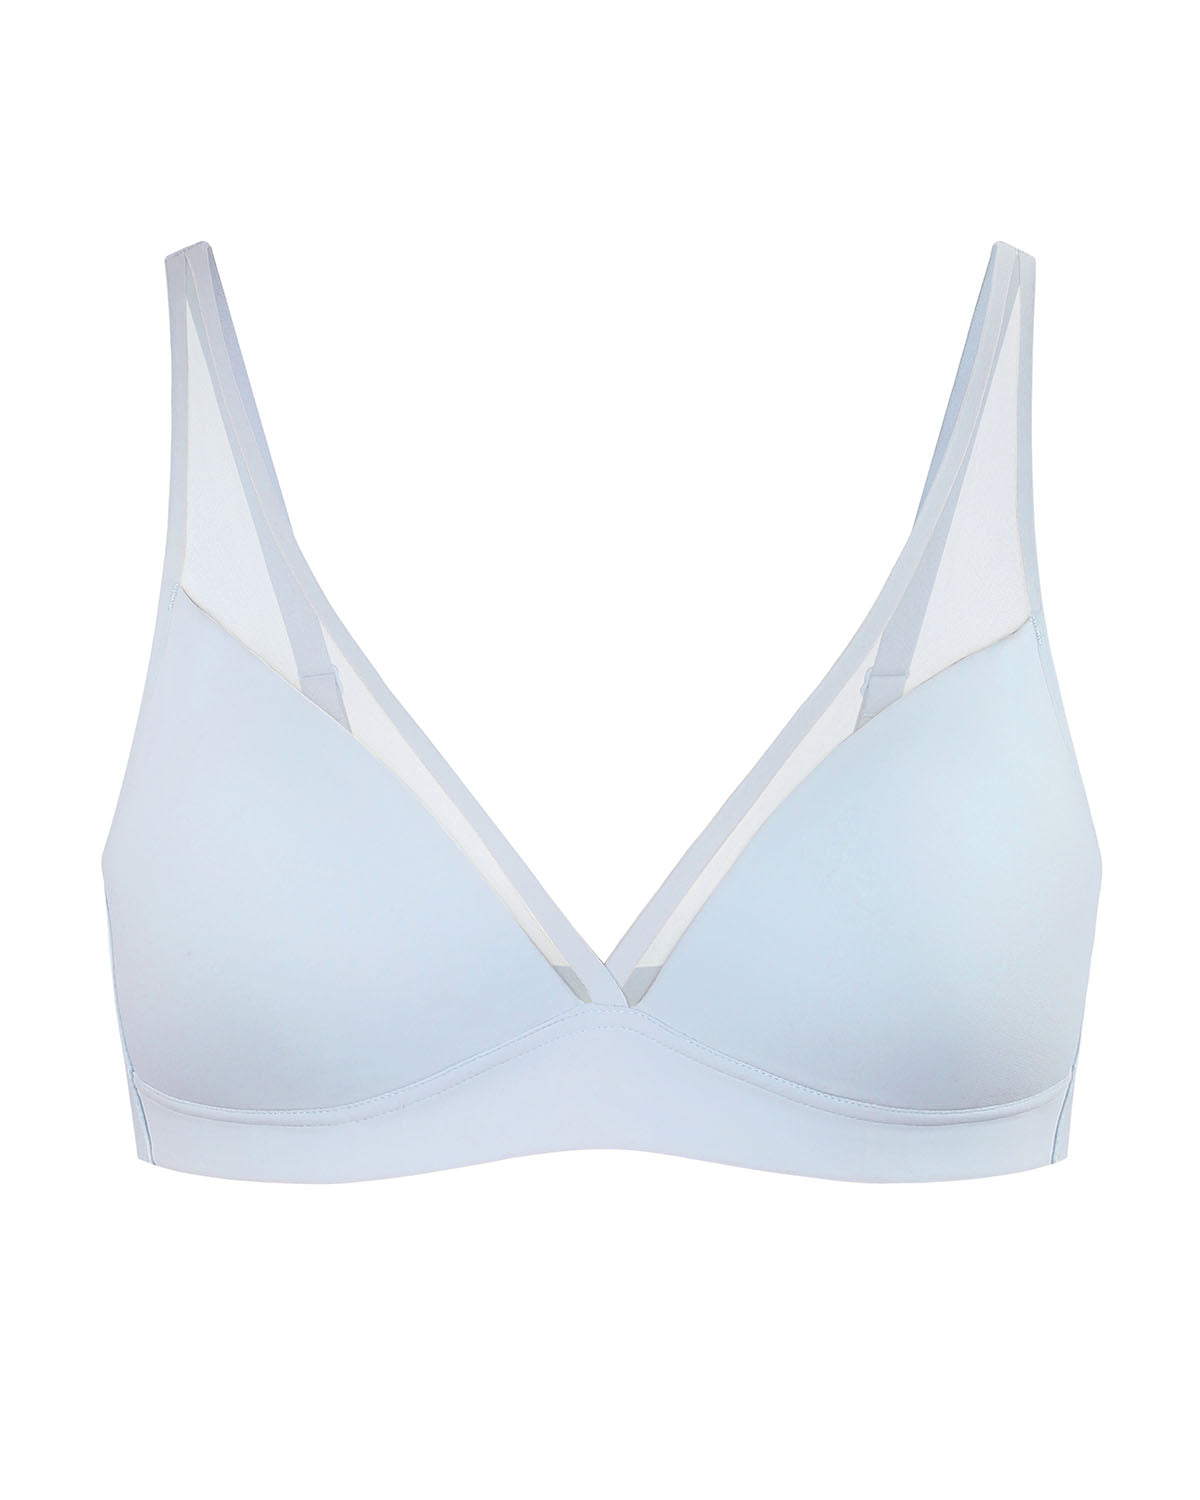 Comfy bra to easily style with!  Cosmolle Review & Try On ft. @Mimikickass  